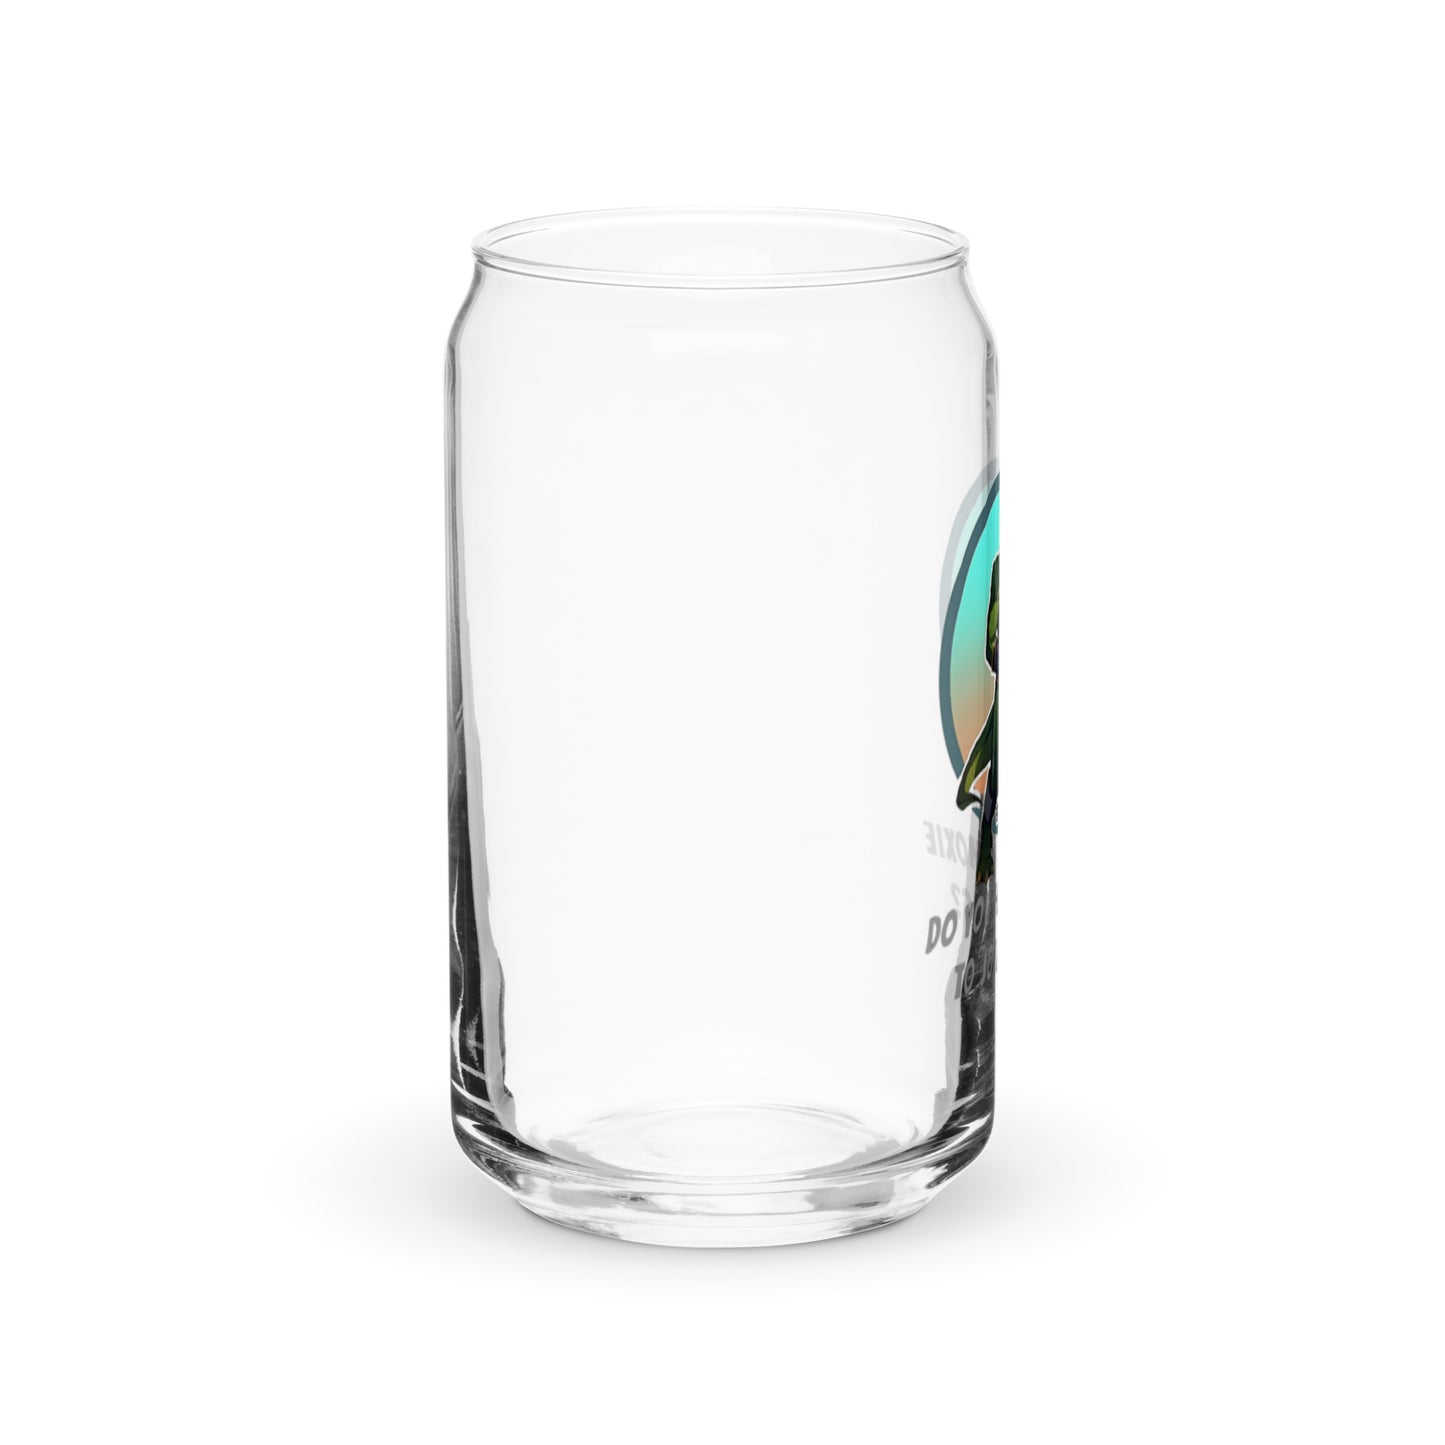 DEE's Can-shaped glass